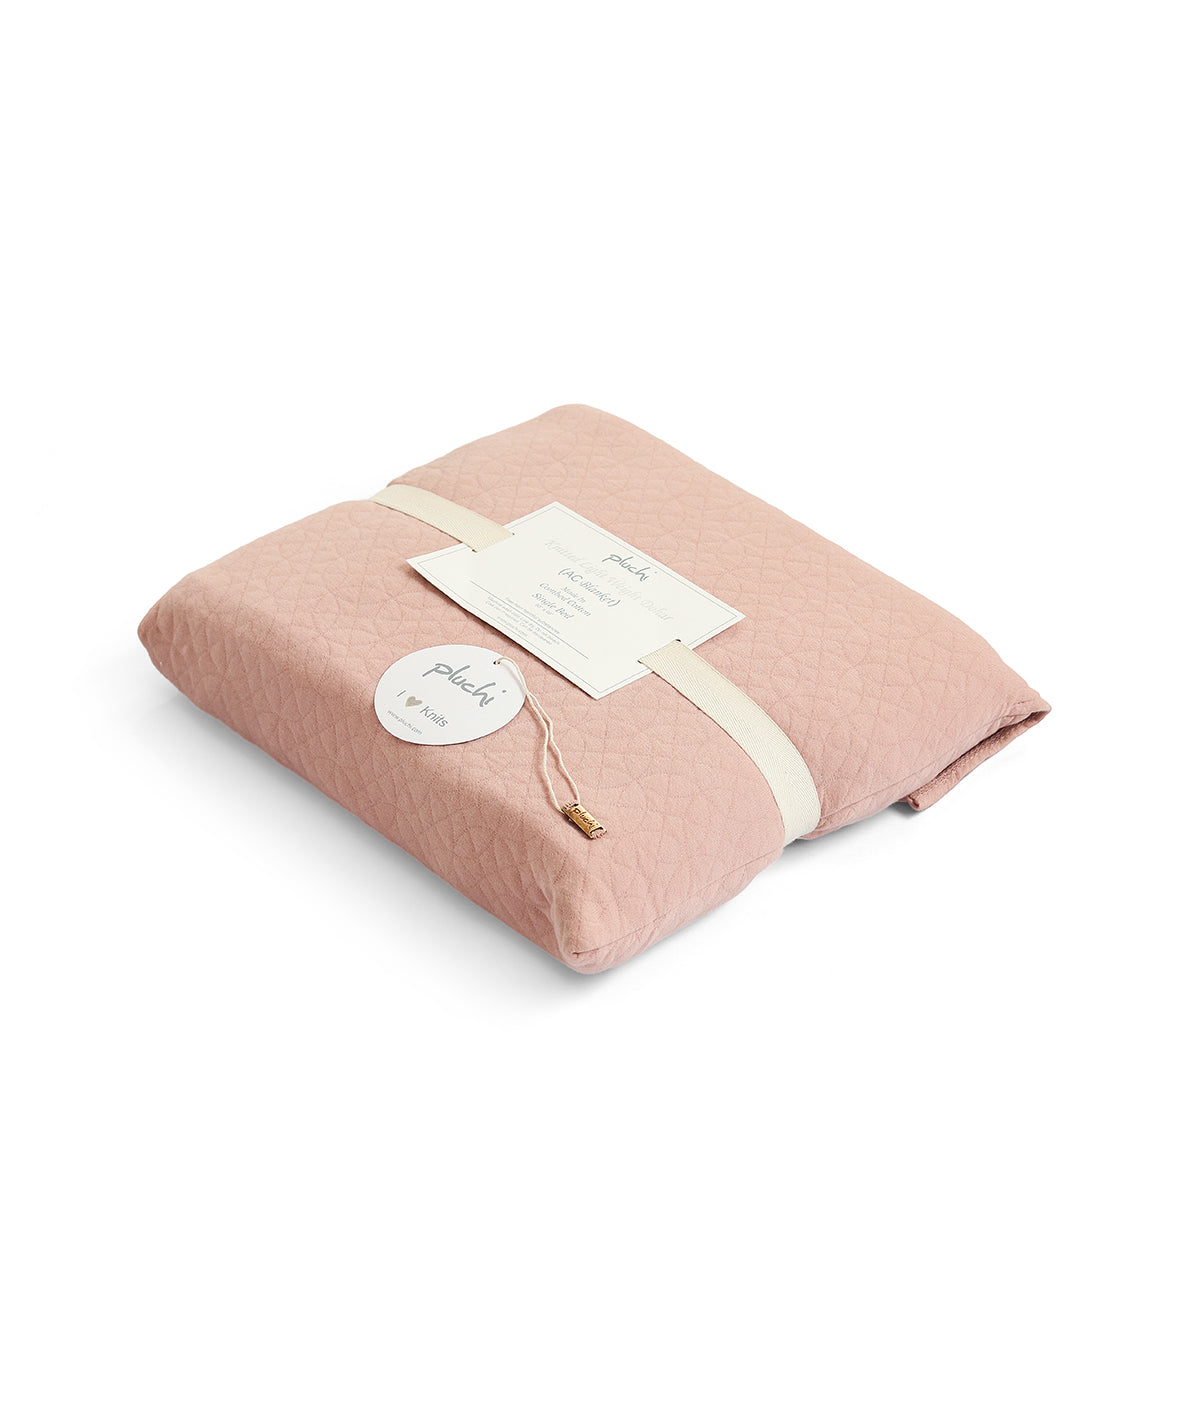 Cloud Jersey Cotton Knitted Single Bed Dohar / Quilt (Pale Pink)